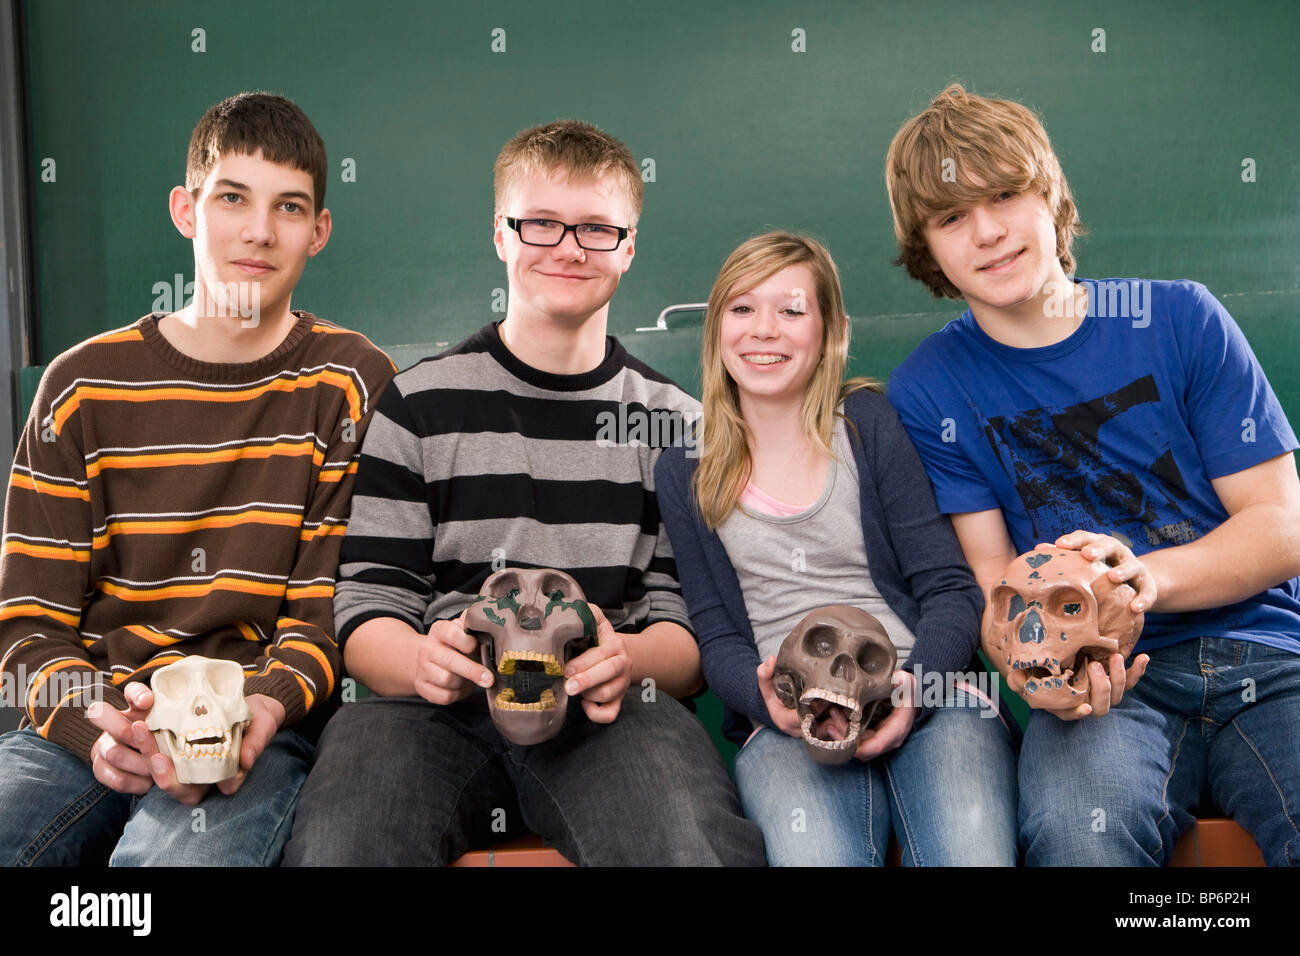 Four students holding primate skulls in biology class, portrait Stock Photo